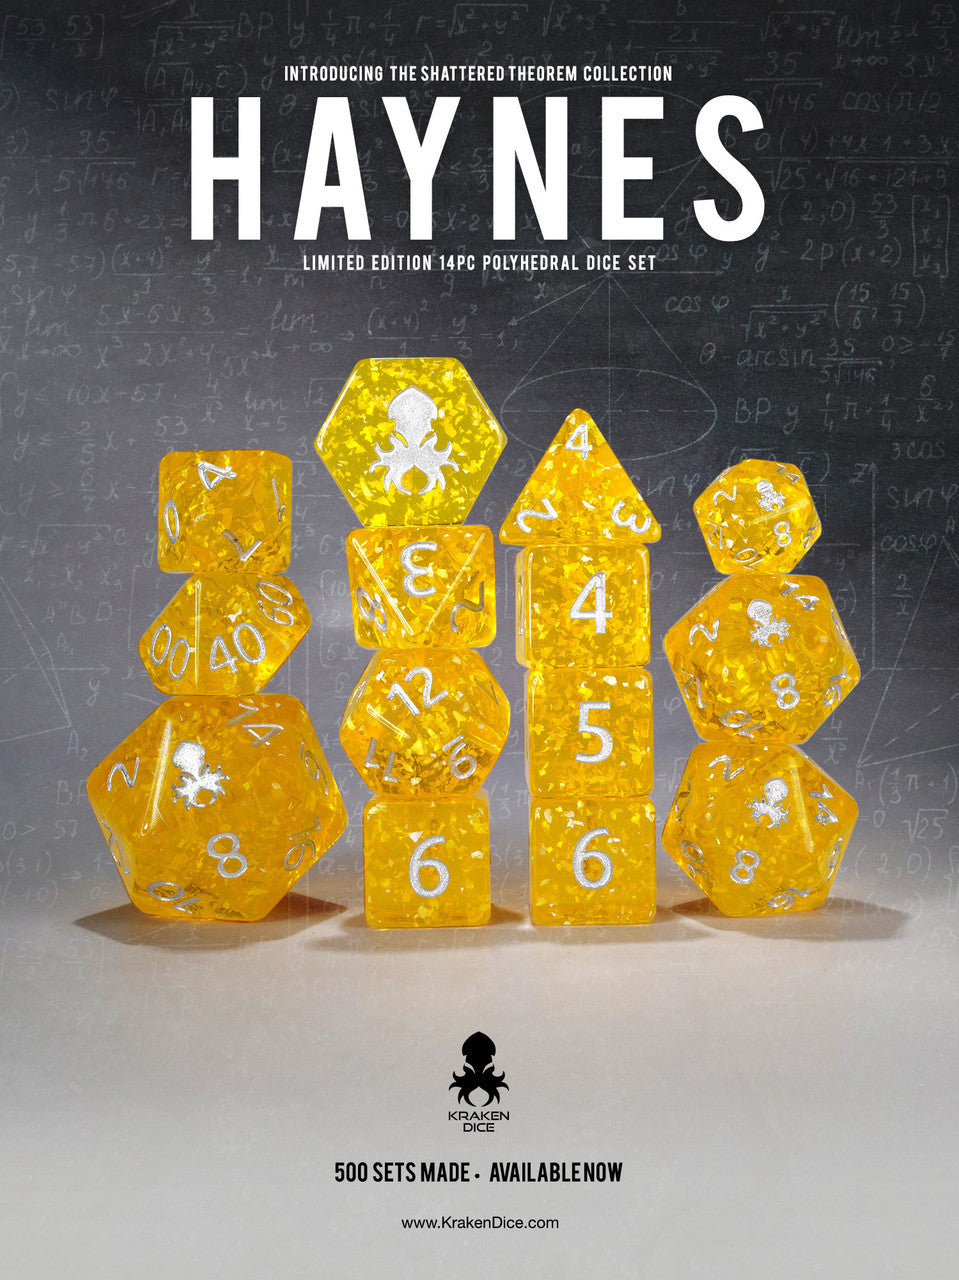 Haynes : Shattered Theorem 14pc Limited Edition Polyhedral Dice Set